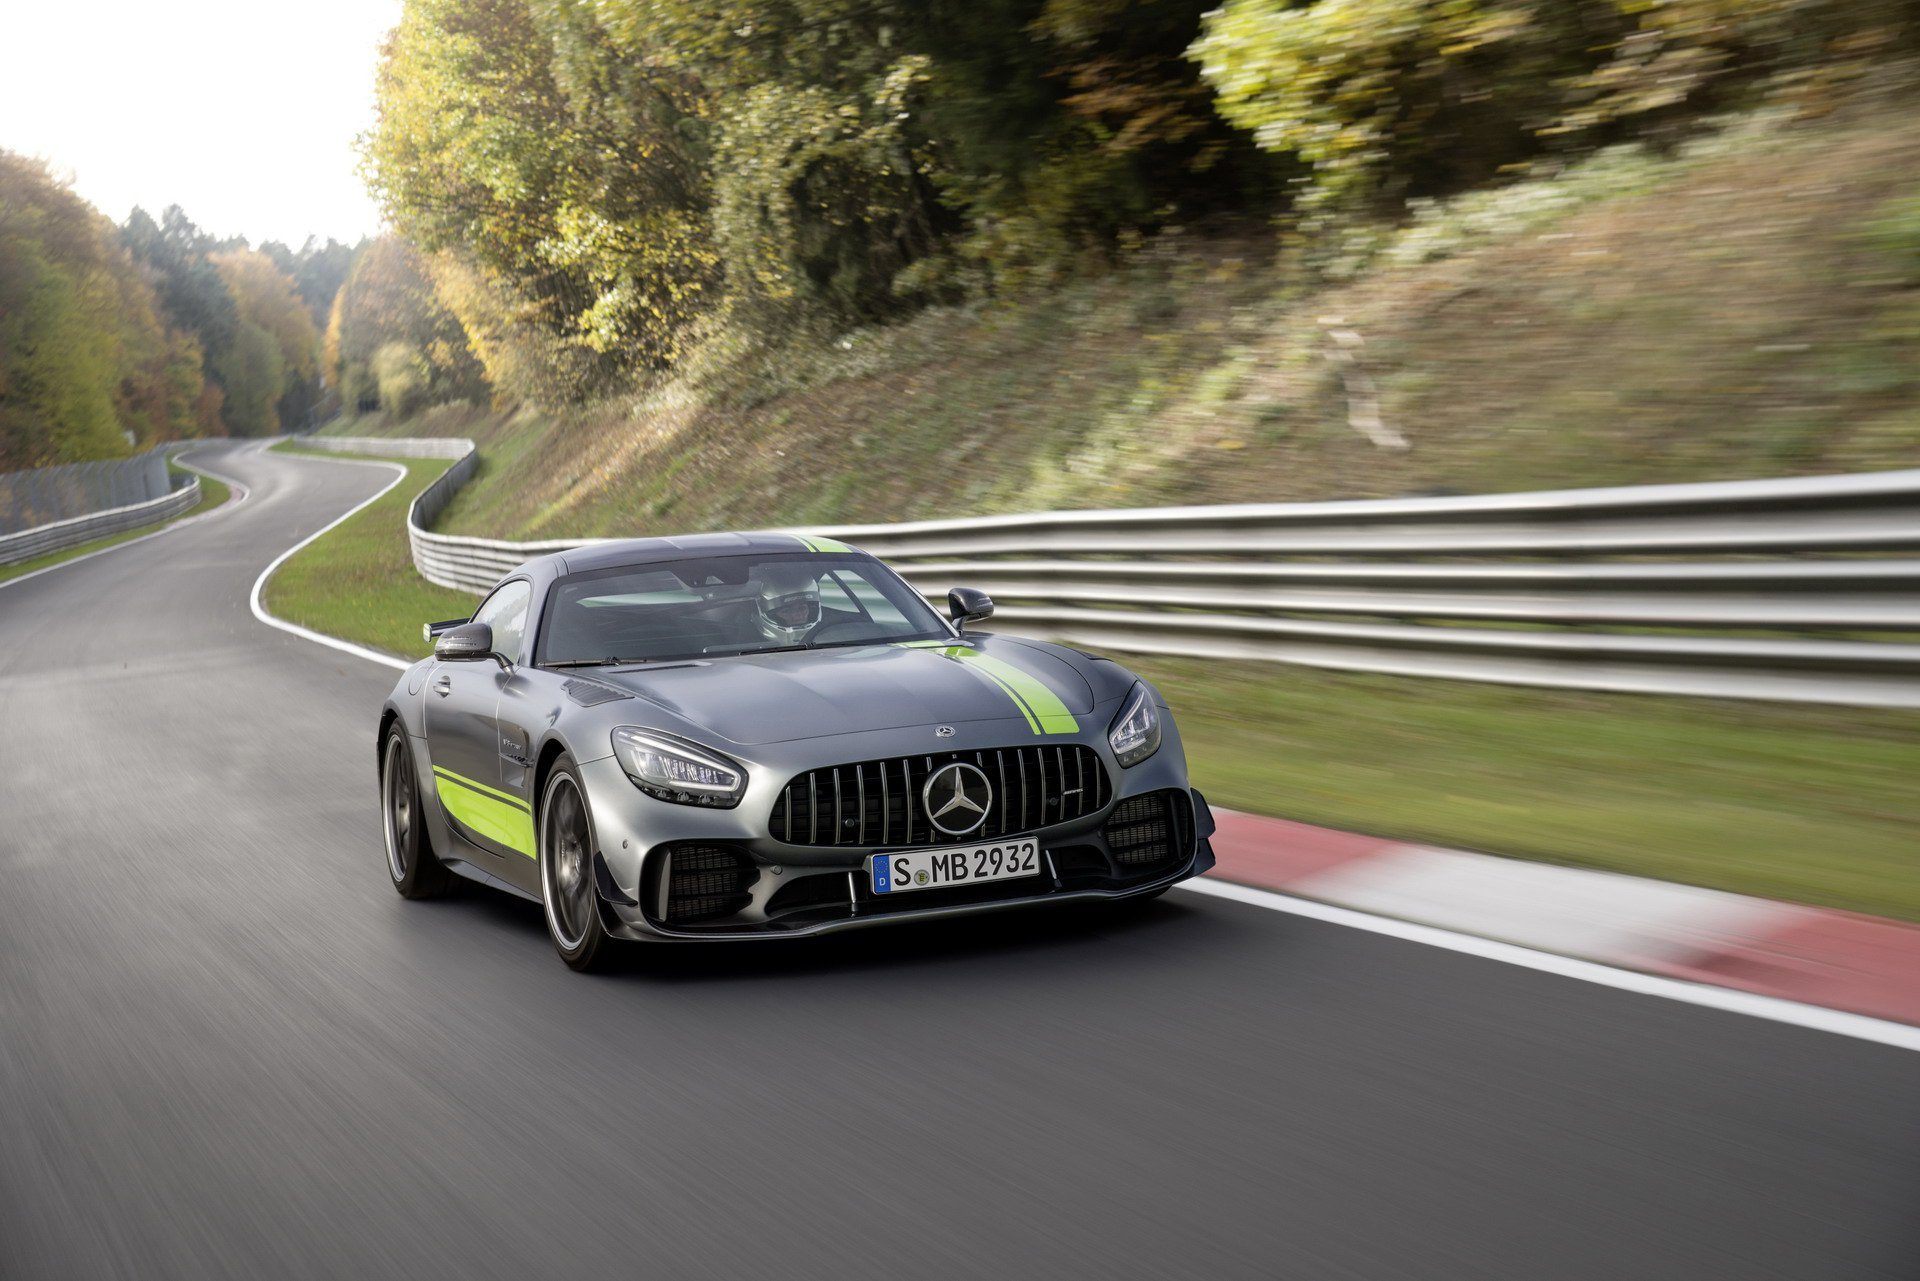 91ebed7b-2020-mercedes-amg-gt-and-amg-gt-r-pro-1.jpg